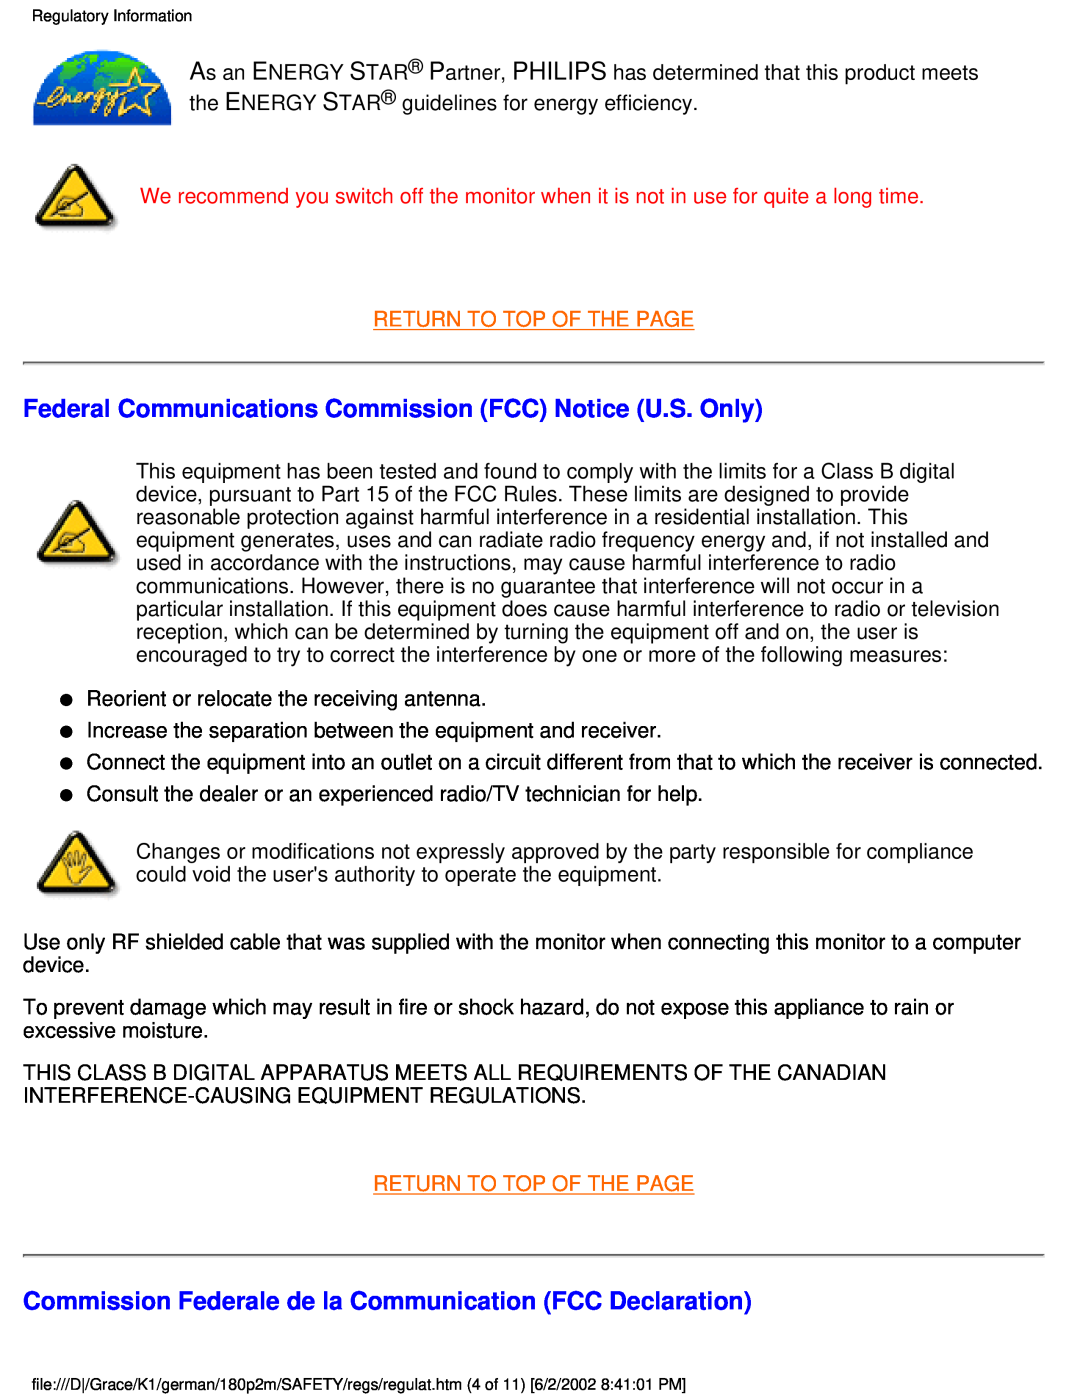 Philips 180P2G user manual Federal Communications Commission FCC Notice U.S. Only, Return To Top Of The Page 